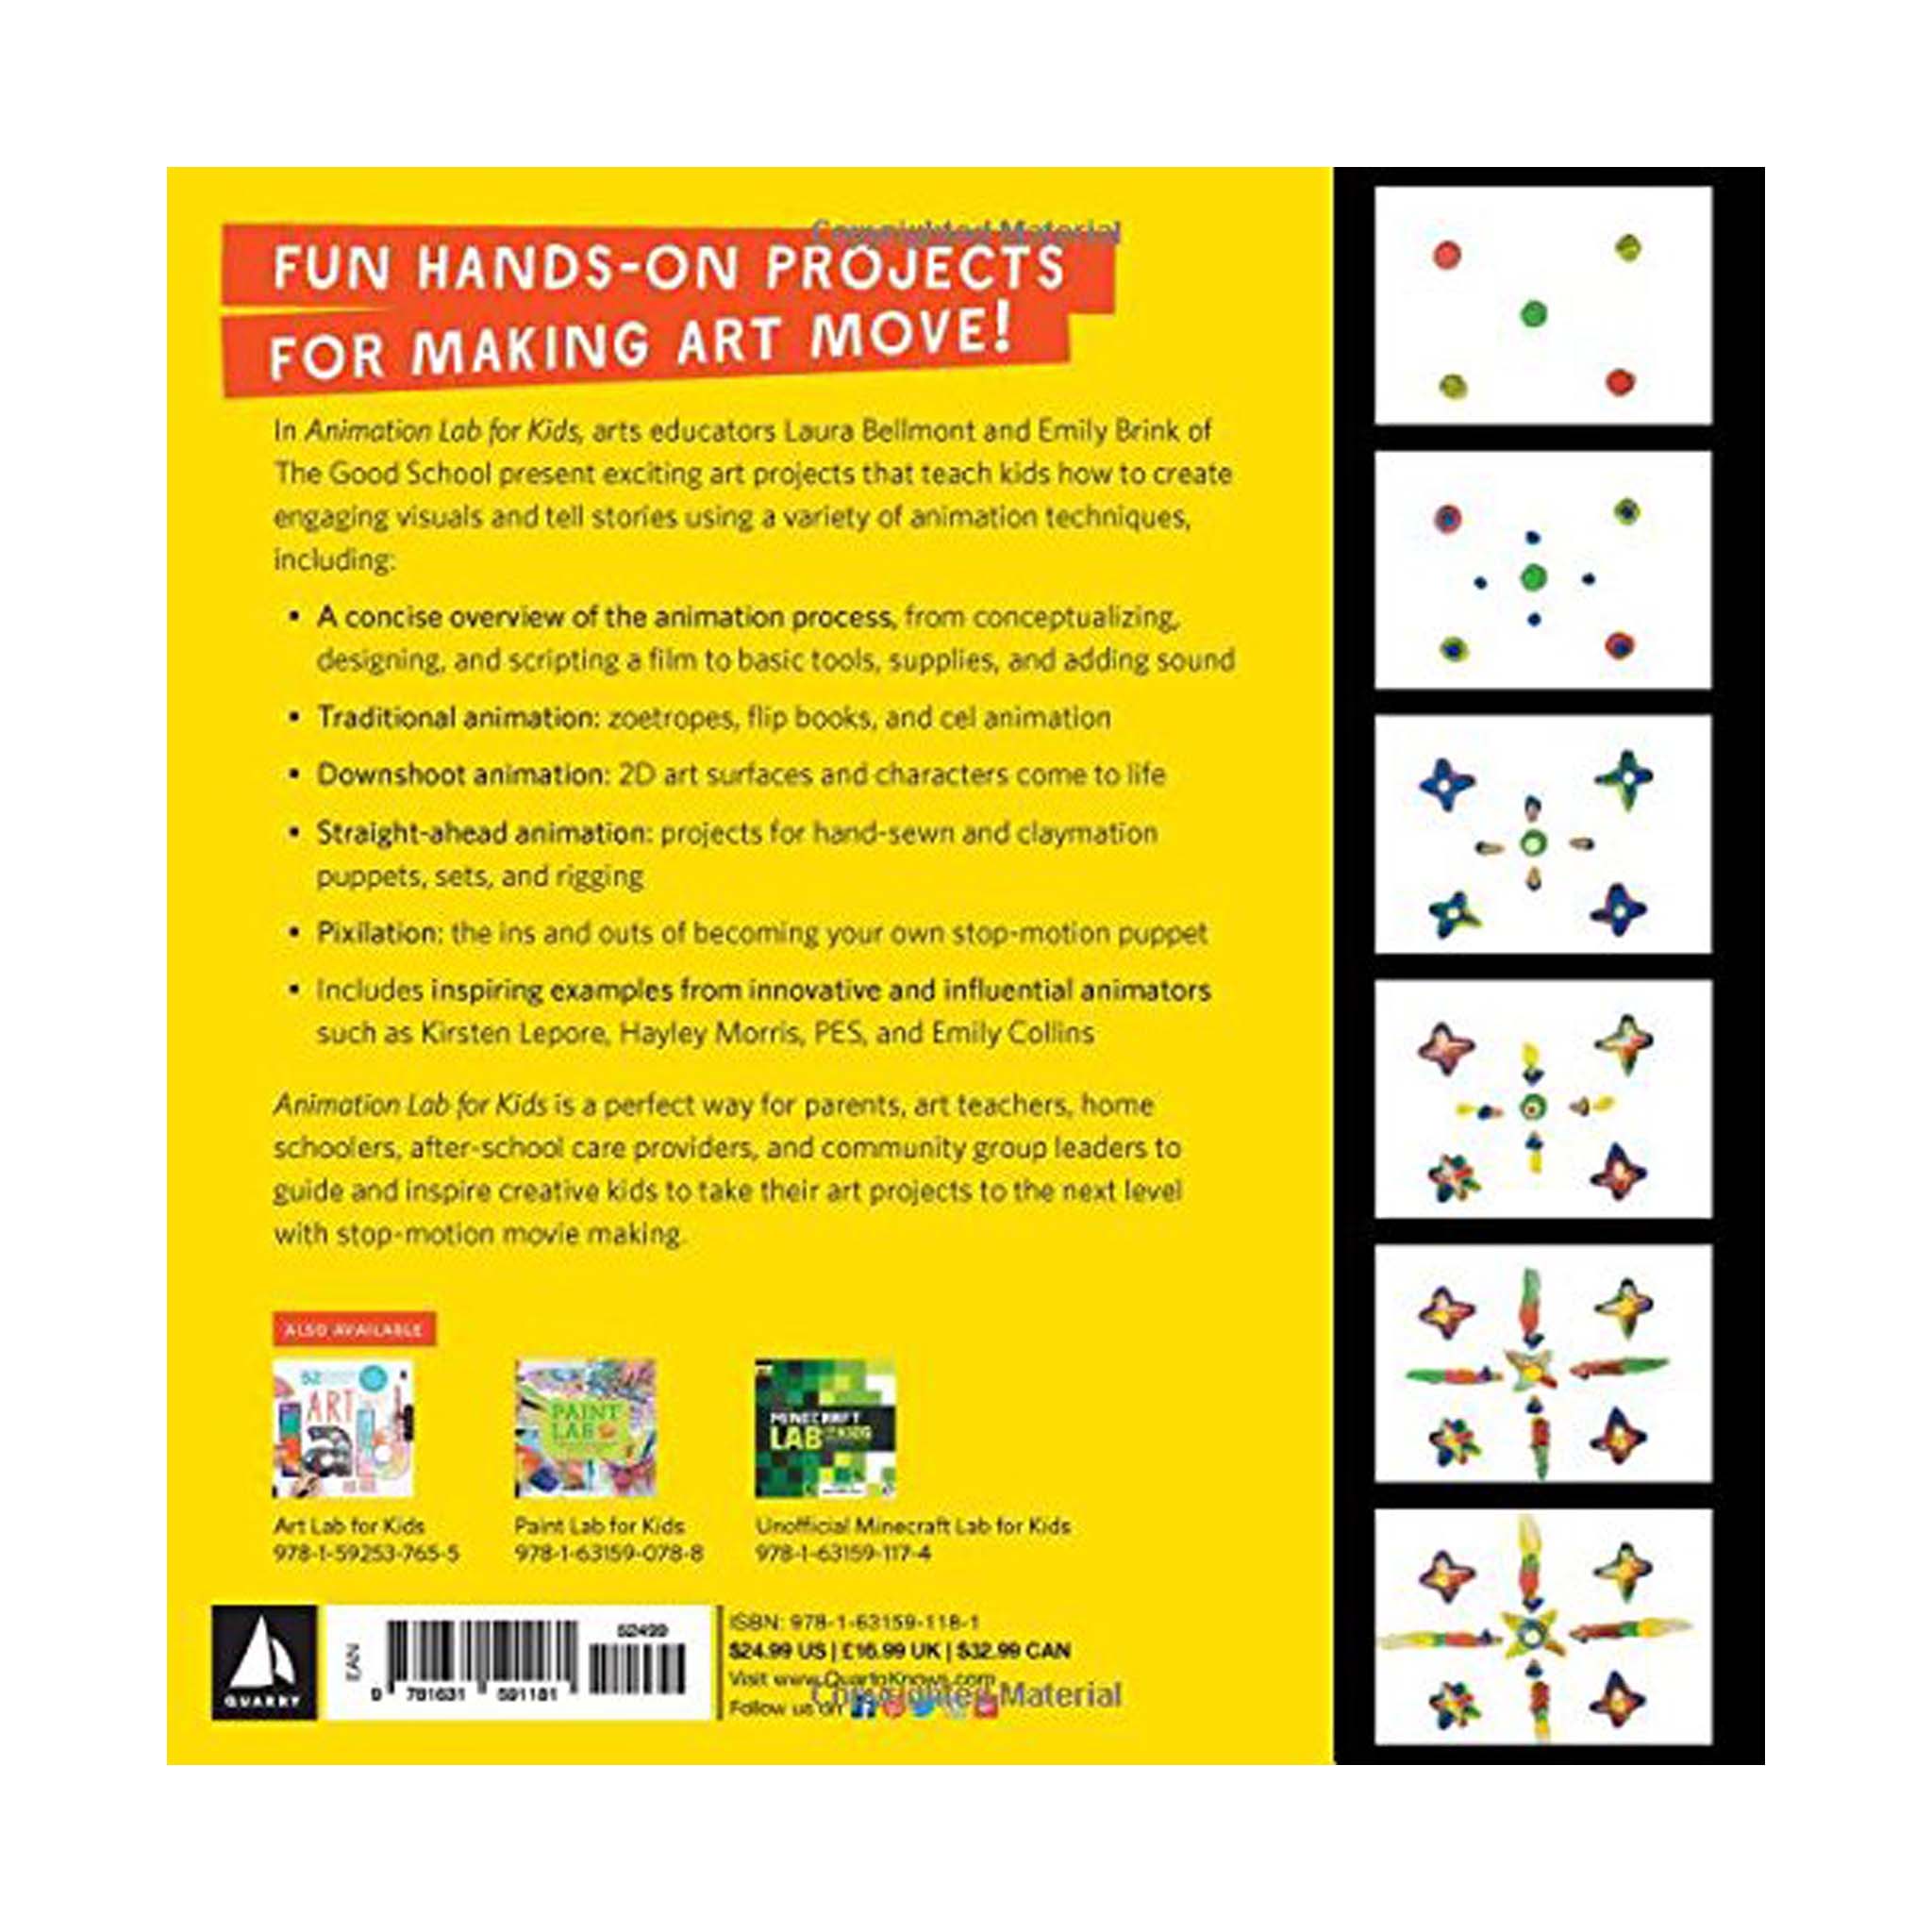 Animation Lab for Kids: Fun Projects for Visual Storytelling and Making Art Move - From Cartooning and Flip Books to Claymation and Stop-motion Movie Making [Book]